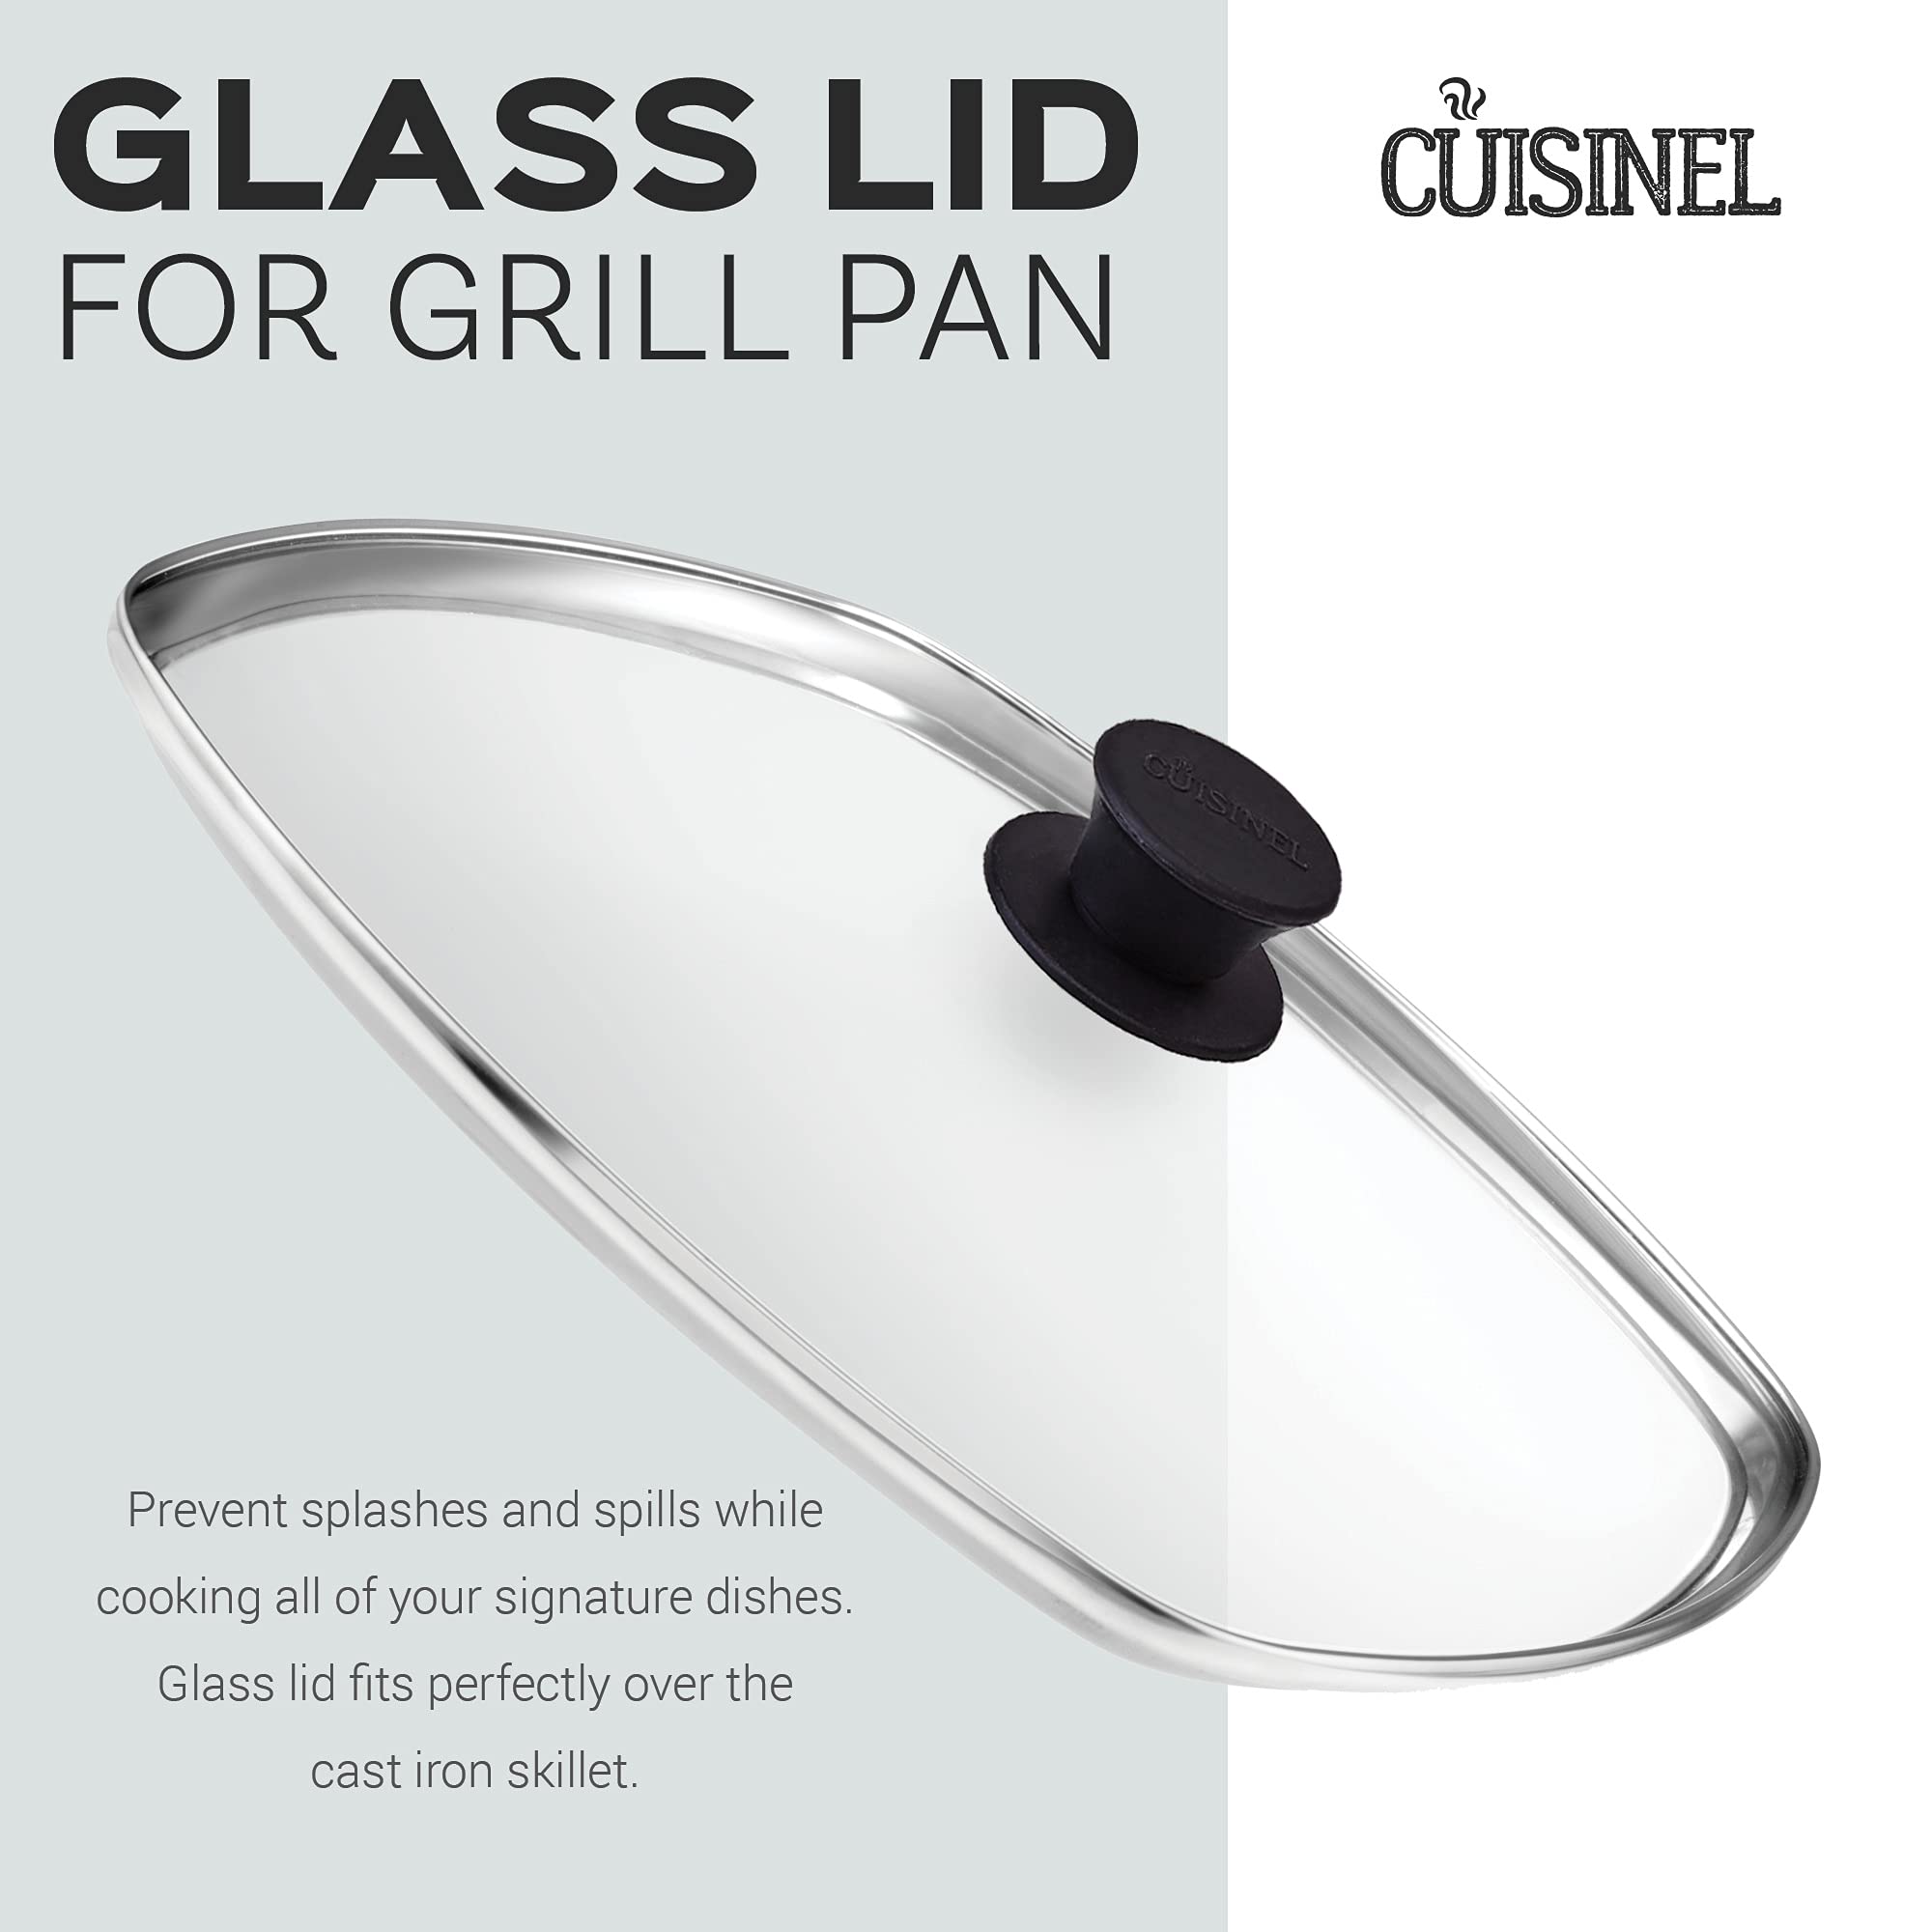 Cuisinel Cast Iron Square Grill Pan + Glass Lid - 10.5" Pre-Seasoned Ridged Skillet + Handle Cover + Pan Scraper - Grill, Stovetop, Fire Safe - Indoor and Outdoor Use - for Grilling, Frying, Sauteing  - Good